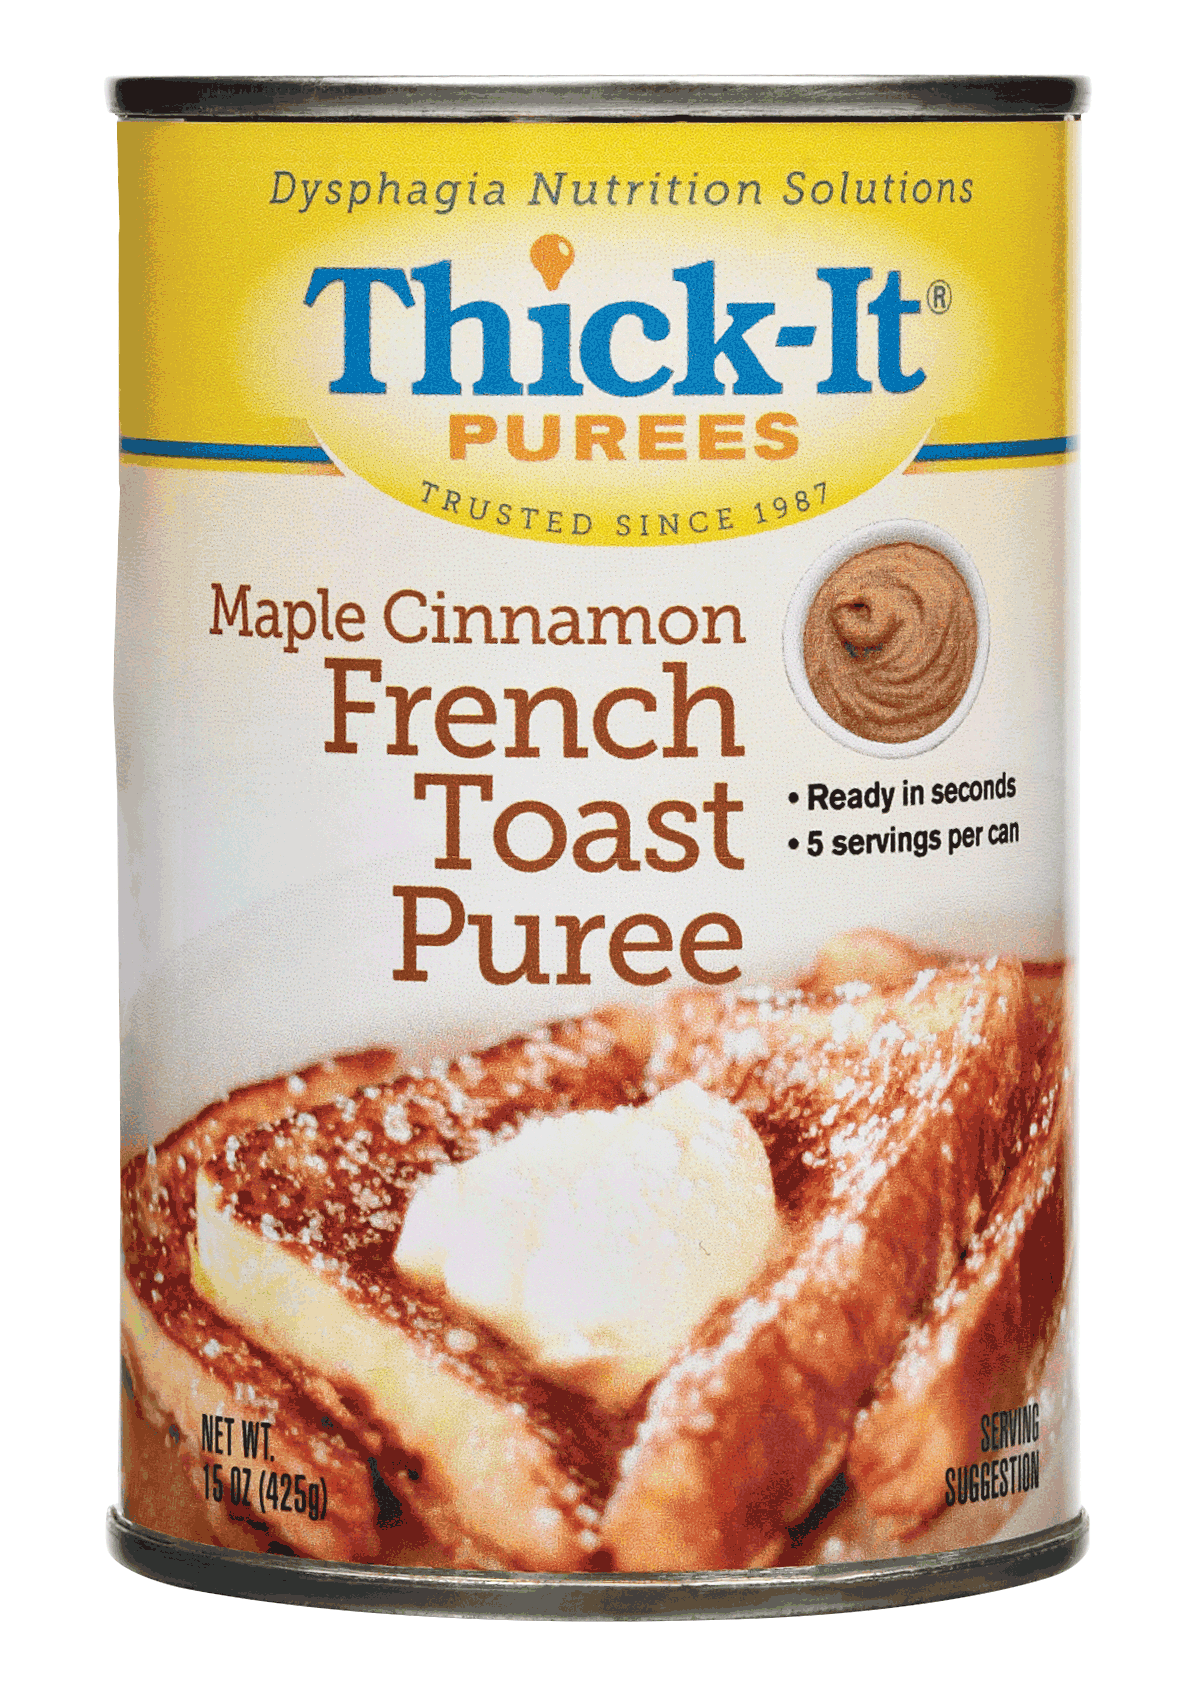 EA/1 - Thick-It Maple Cinnamon French Toast Puree 15 oz. Can - Best Buy Medical Supplies